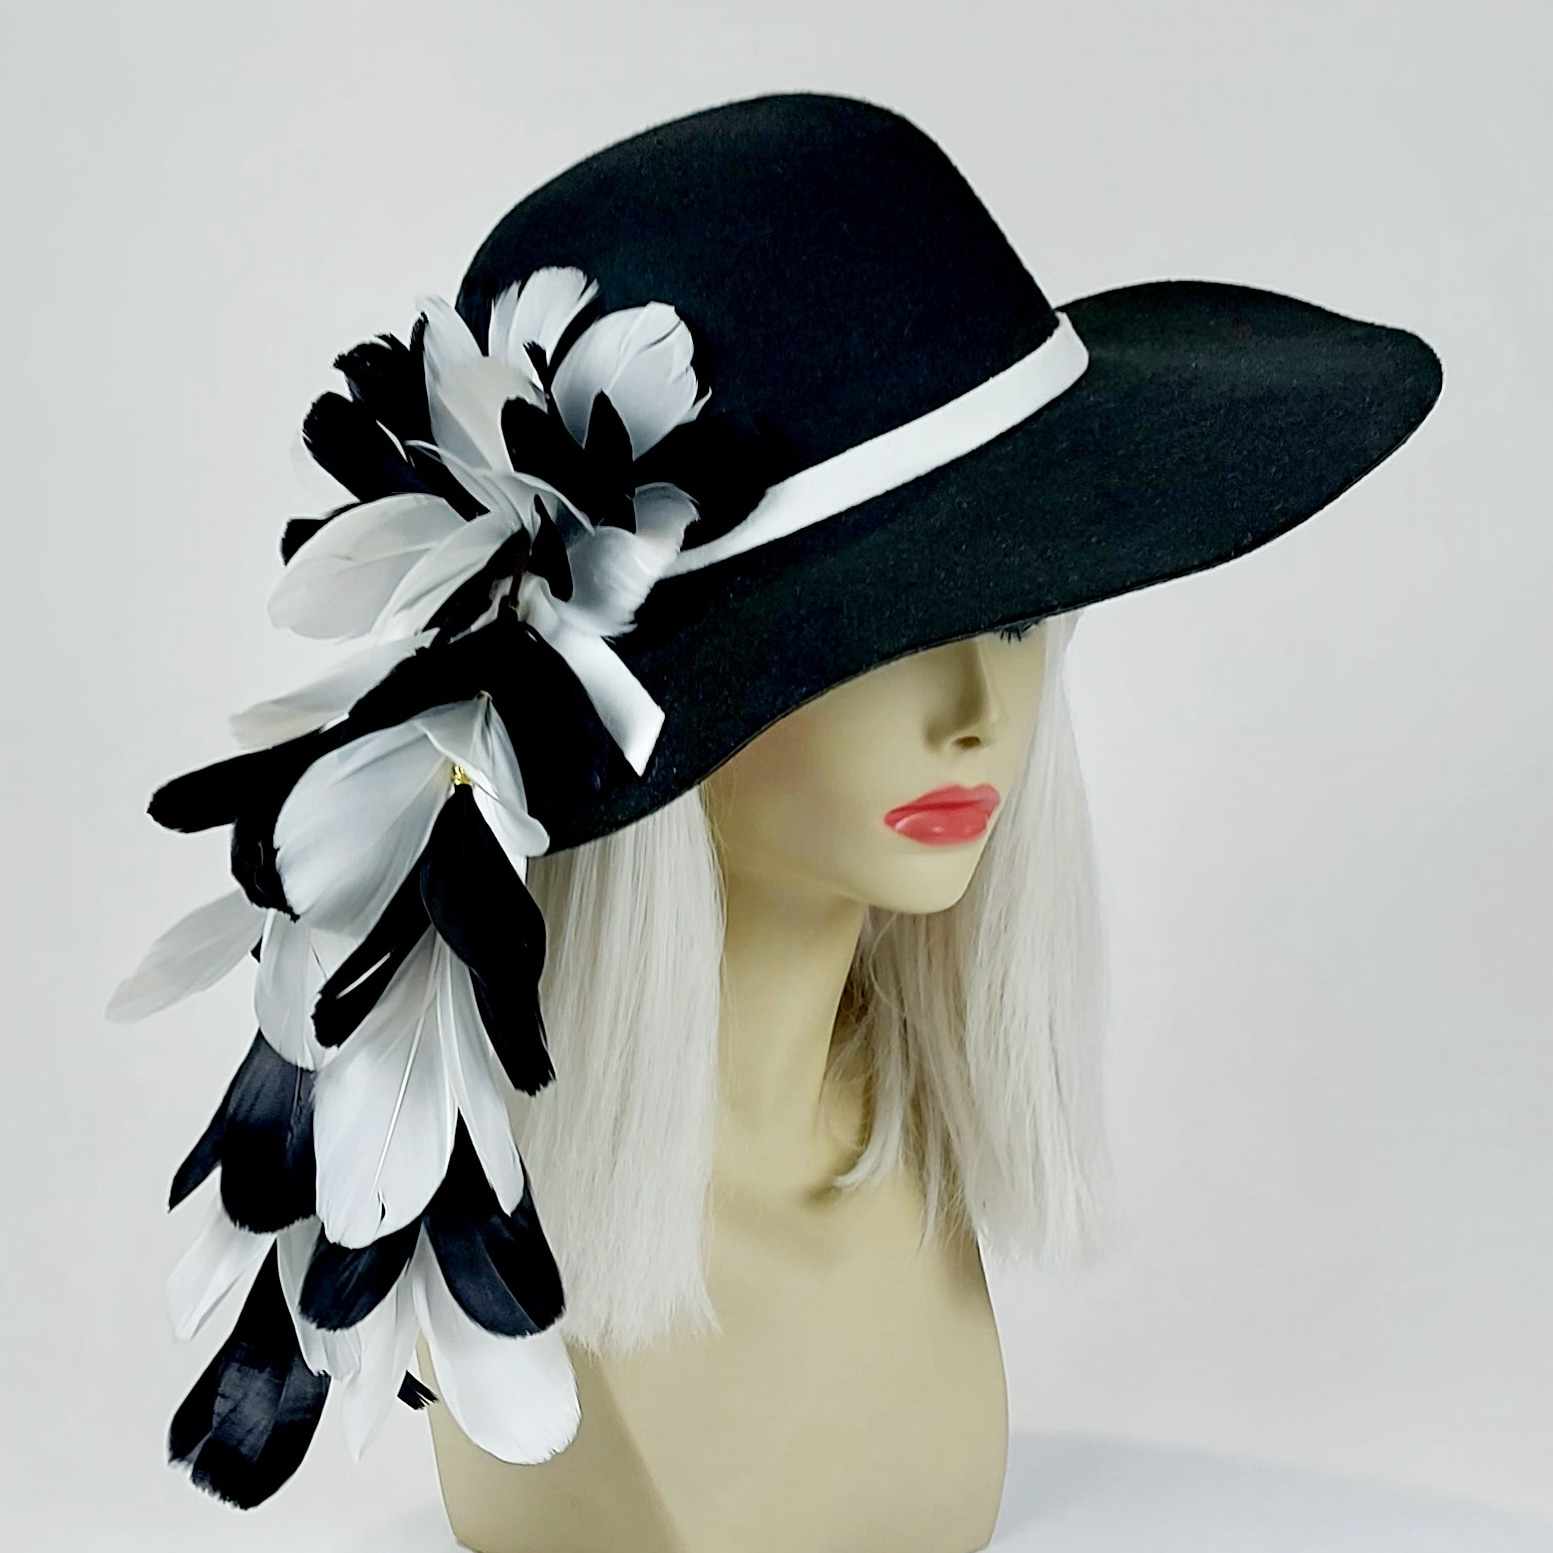 black and white vintage boho floppy hat for the races and festivals